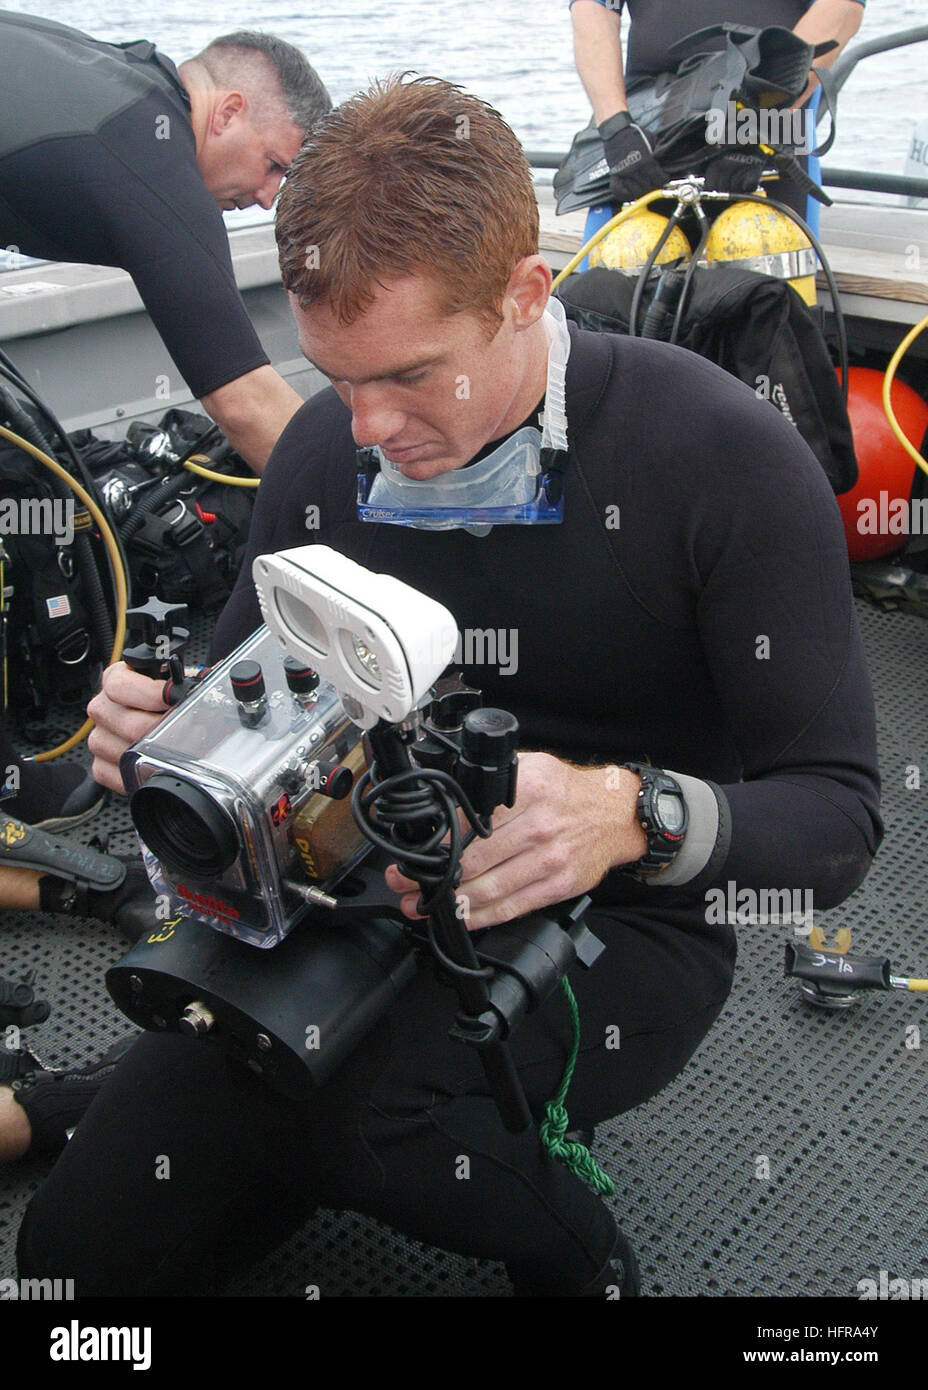 060504-N-6775N-012 Honolulu, Hawaii (May 4, 2006) - Electrician's Mate 1st Class Mark Trumbull assigned to Mobile Diving and Salvage Unit One (MDSU-1) Detachment Three inspects his camera and underwater housing just prior to entering the water. Detachment Three was conducting Self Contained Underwater Breathing Apparatus (SCUBA) training on the 178 foot Sea Tiger located in 120 feet of water off OahuÕs south shore. U.S. Navy photo by Photographer's Mate 2nd Class Justin P. Nesbitt (RELEASED) US Navy 060504-N-6775N-012 Electrician's Mate 1st Class Mark Trumbull assigned to Mobile Diving and Sal Stock Photo